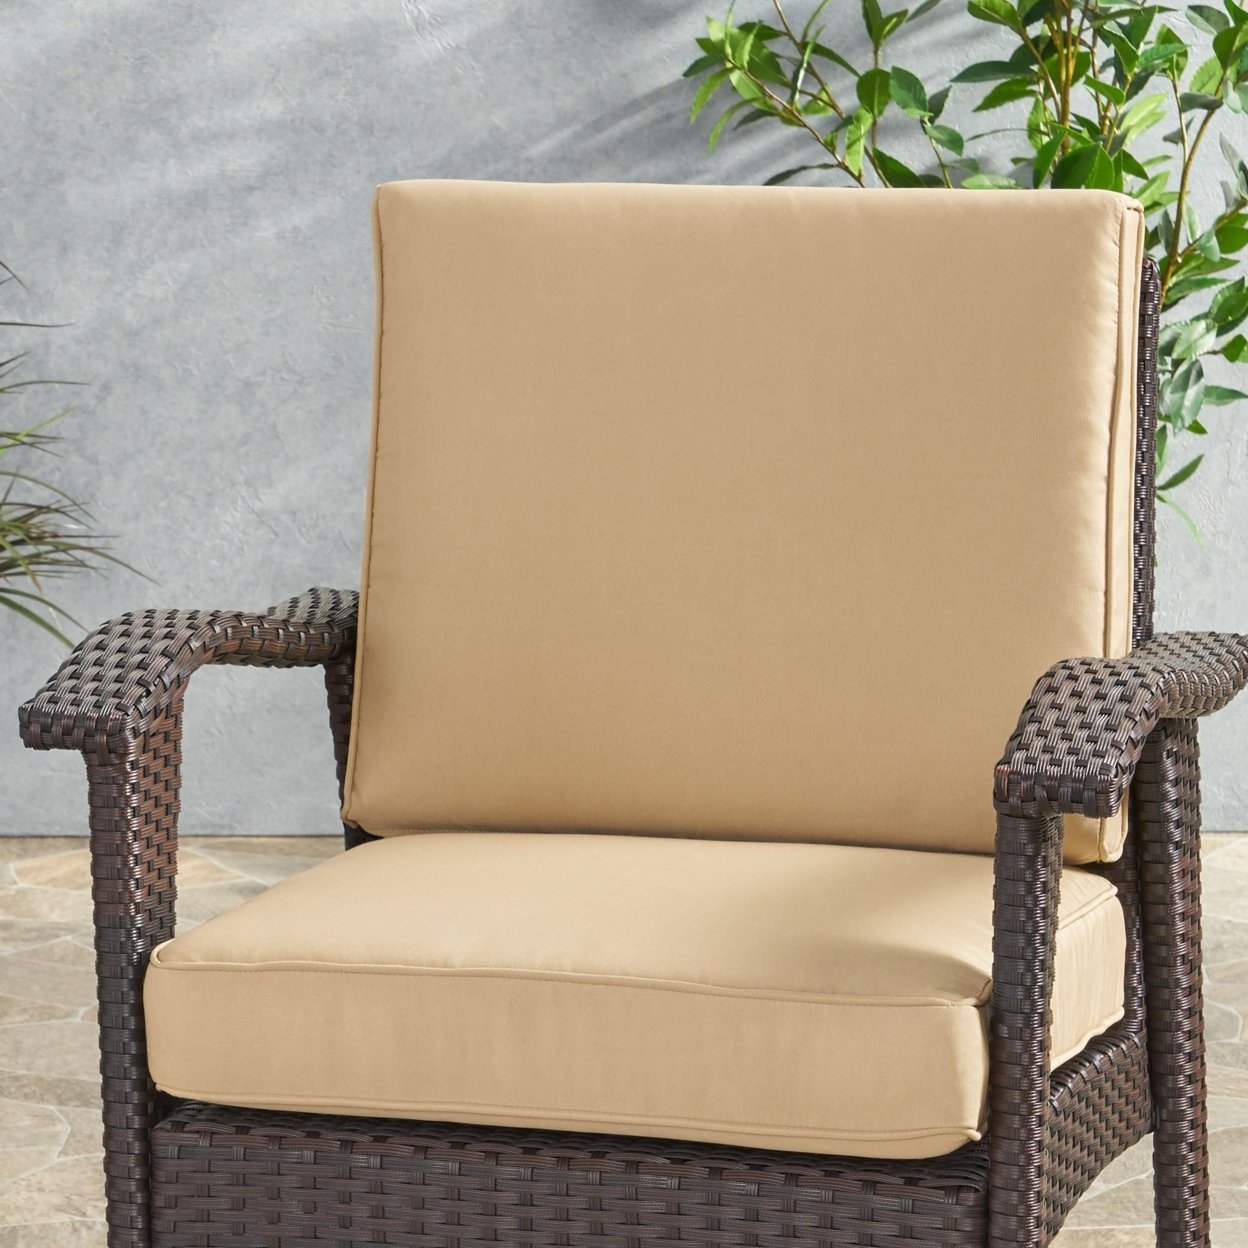 Atiyah Outdoor Water Resistant Fabric Club Chair Cushions With Piping - Tan